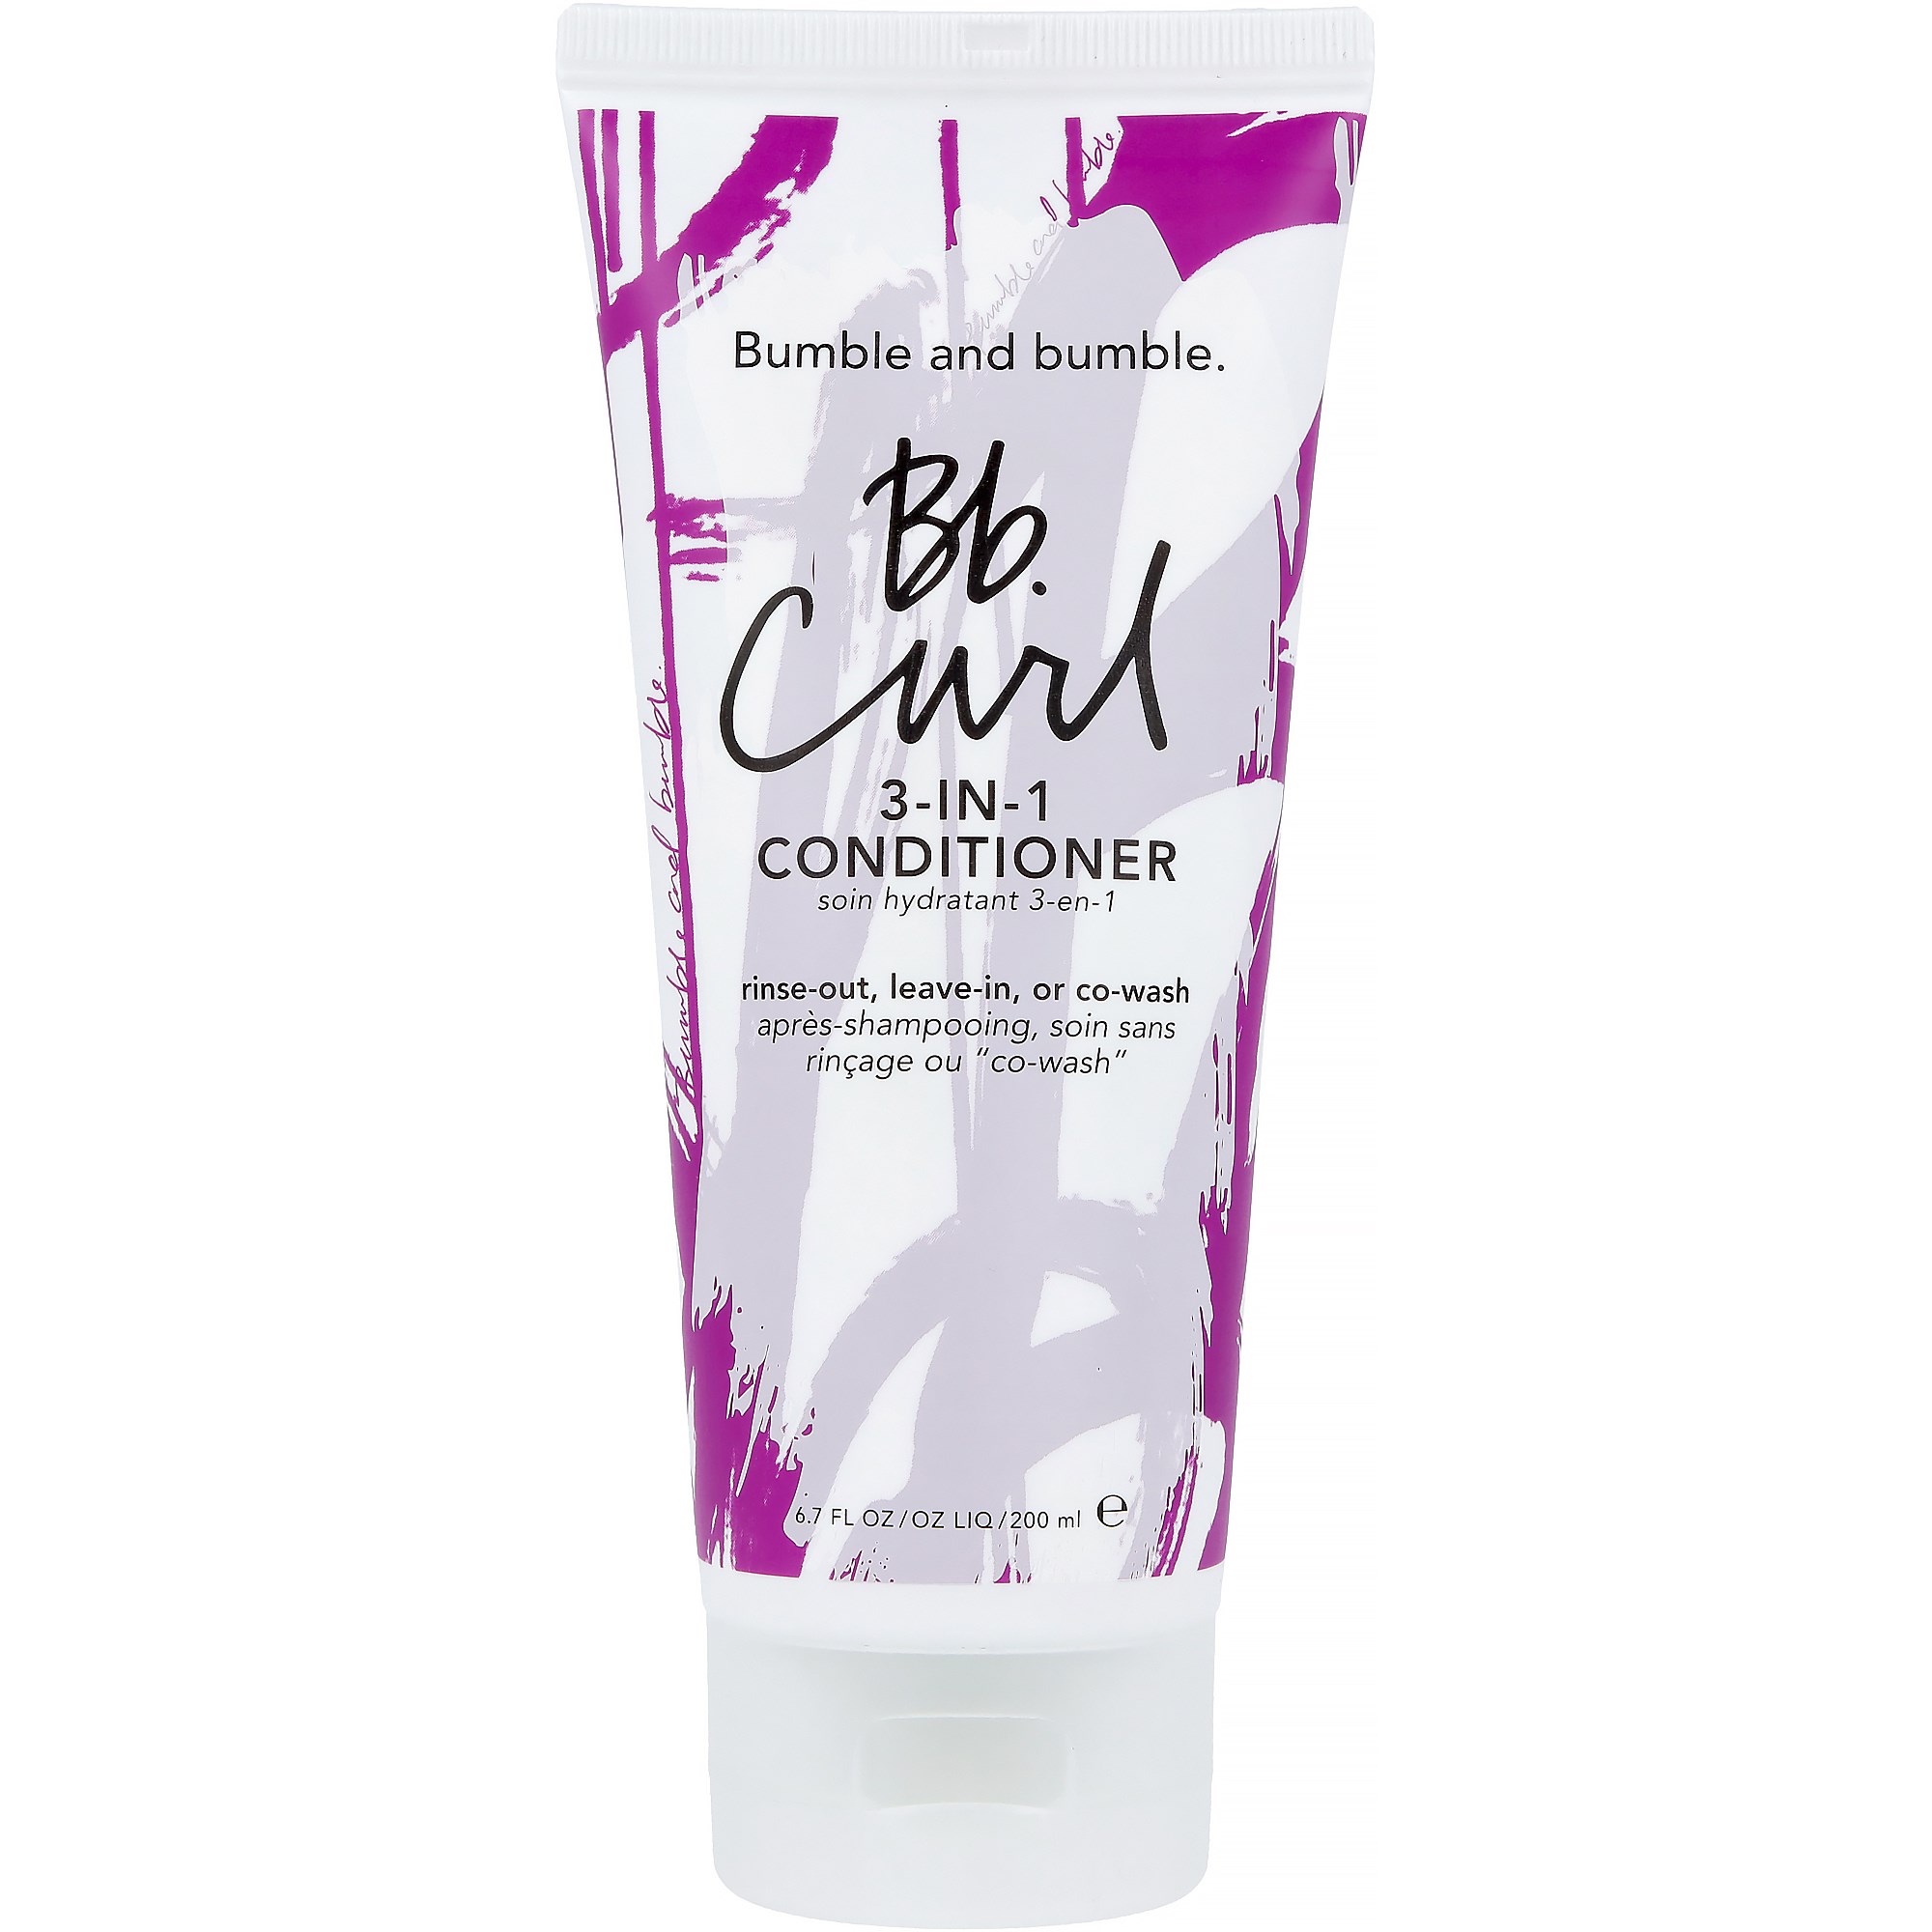 Läs mer om Bumble and bumble Curl 3-in-1 Conditioner